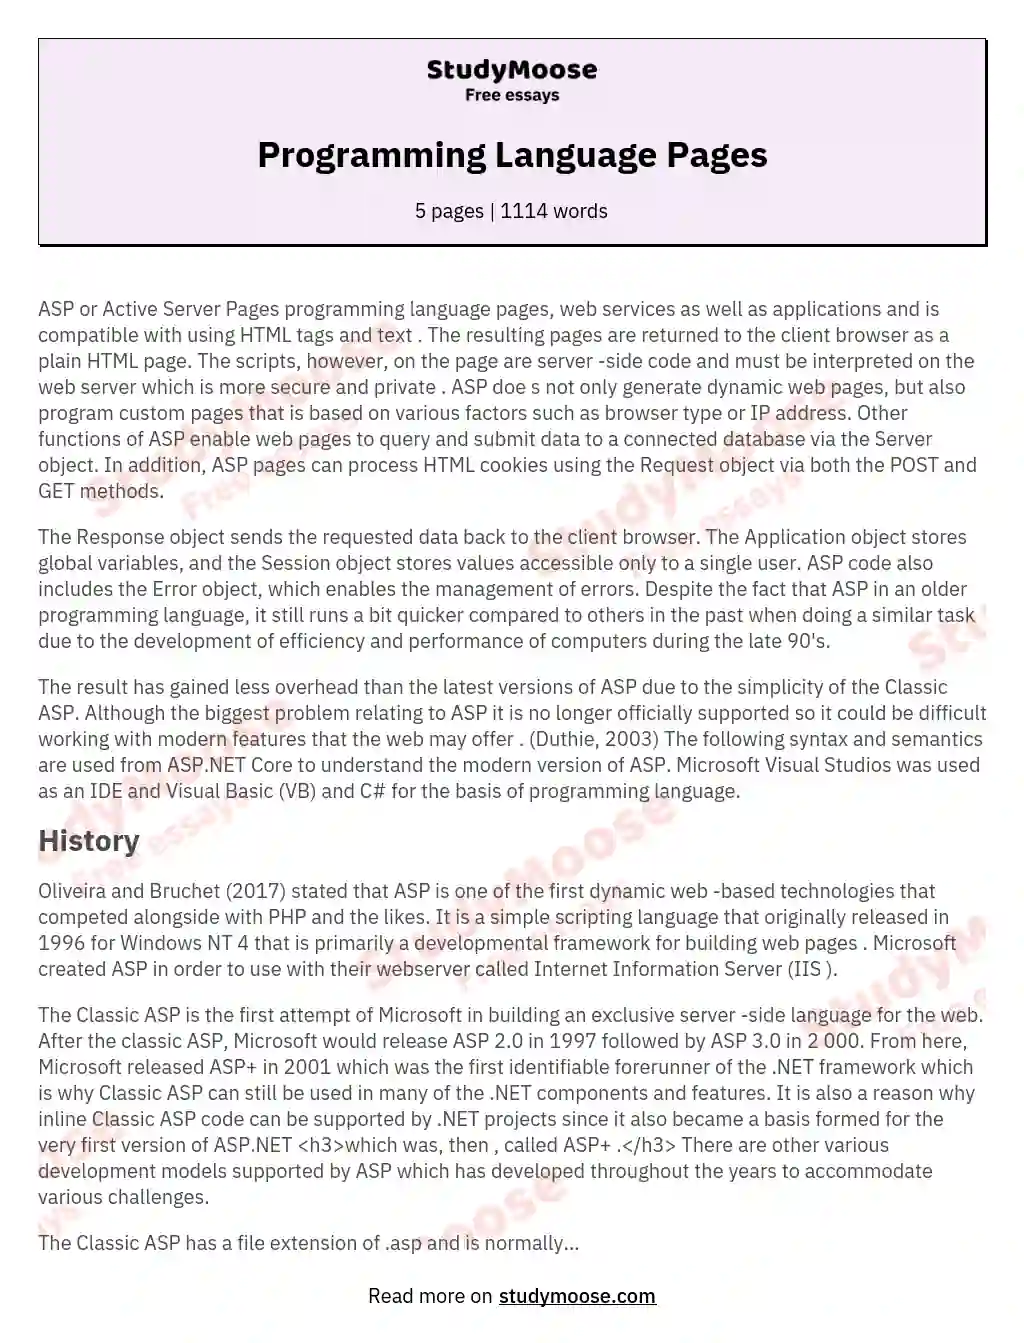 Programming Language Pages essay